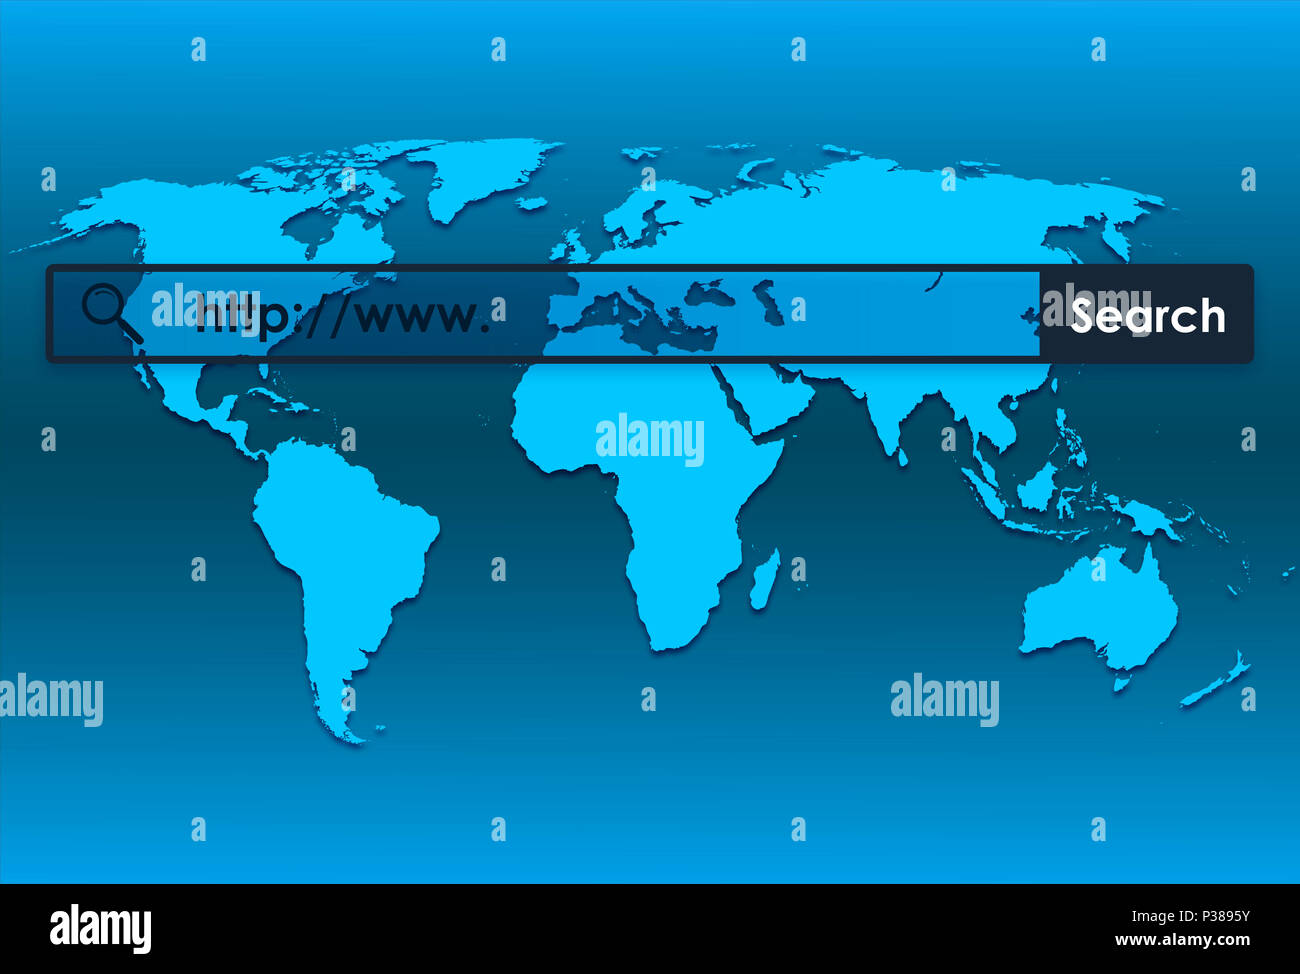 world map and world wide web searching Stock Photo